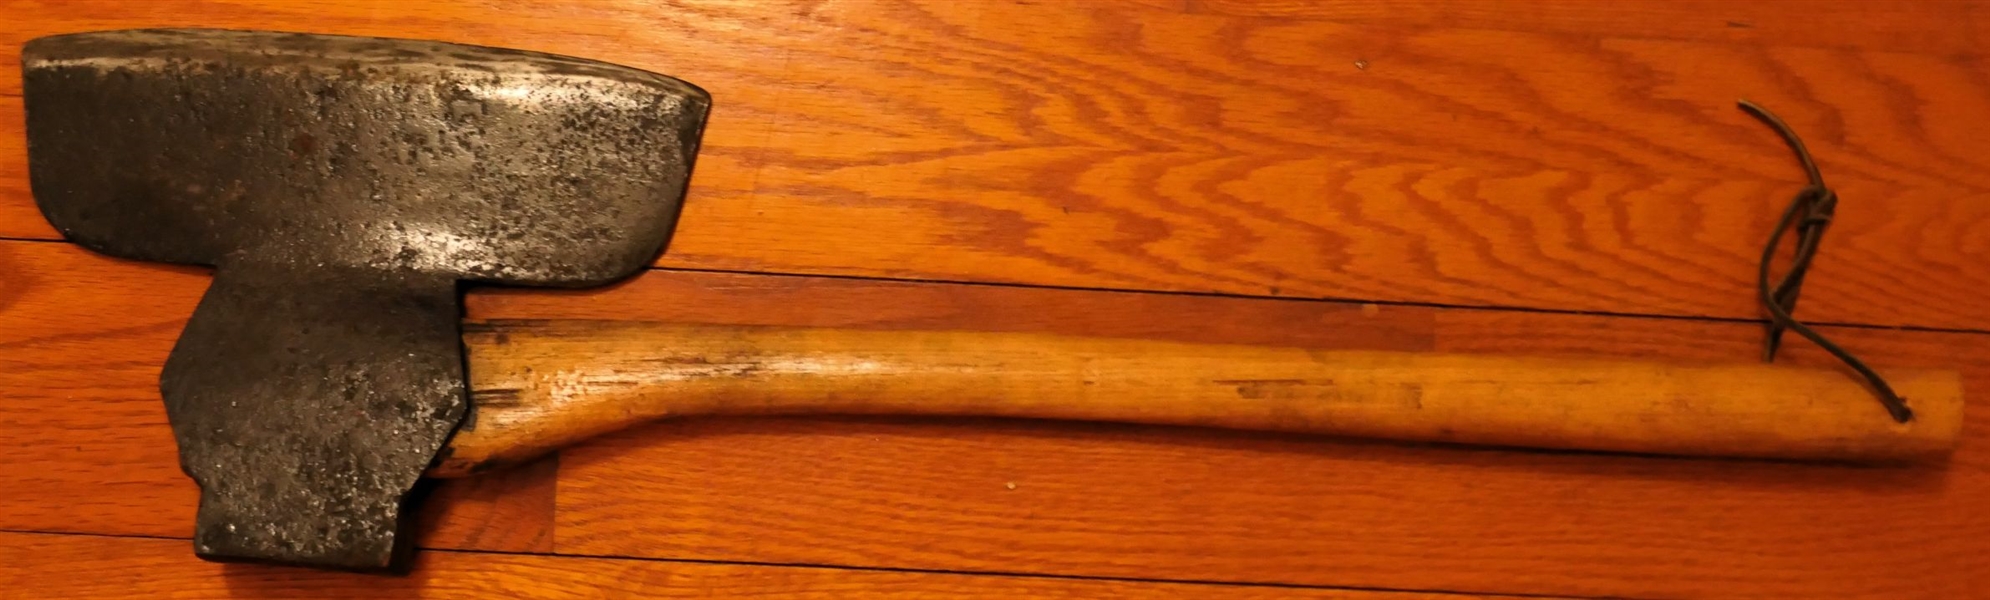 Broad - Hewing Axe with Wood Handle - Axe Head Measures 10 1/2" by 8 1/2" 